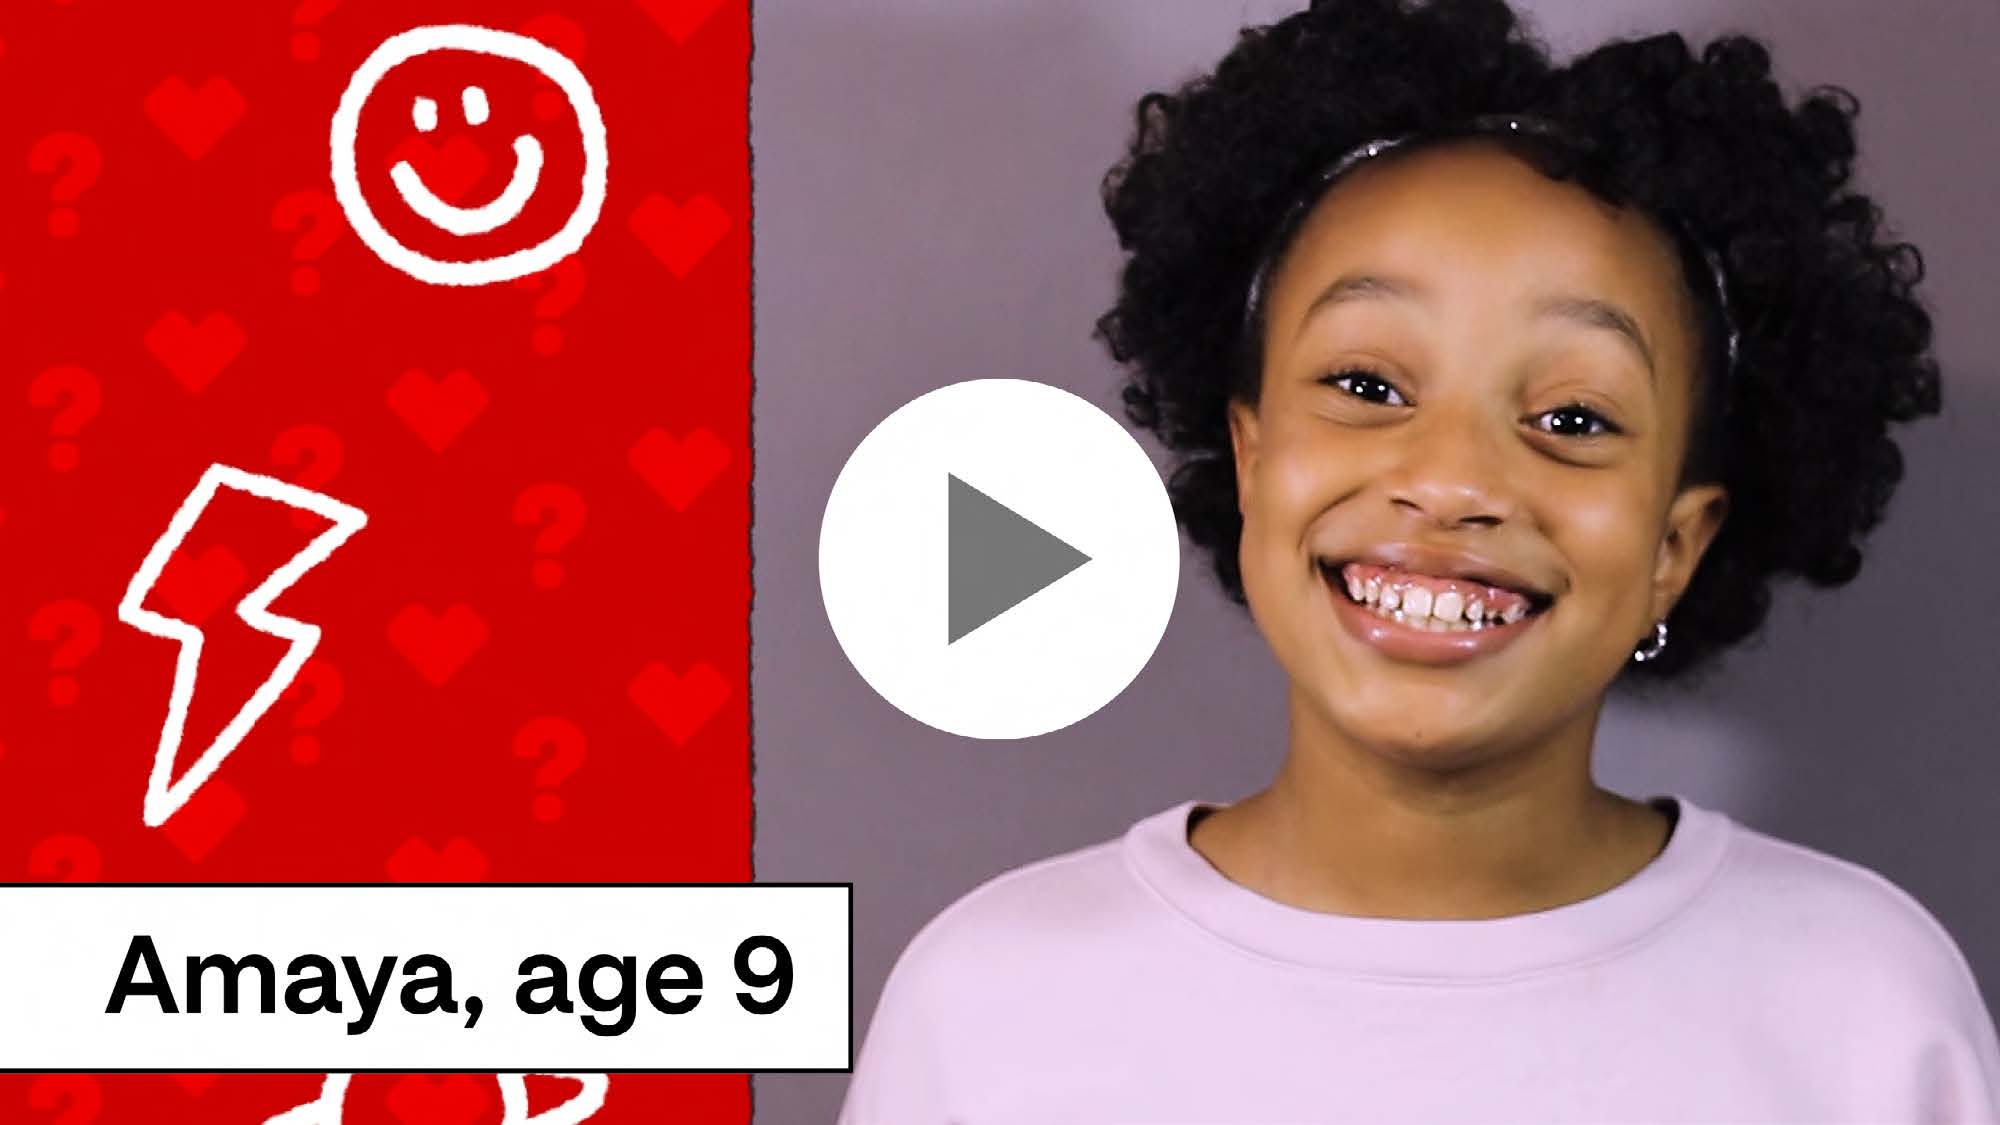 Play video of Amaya, age 9, asking “Will getting the vaccine hurt?”